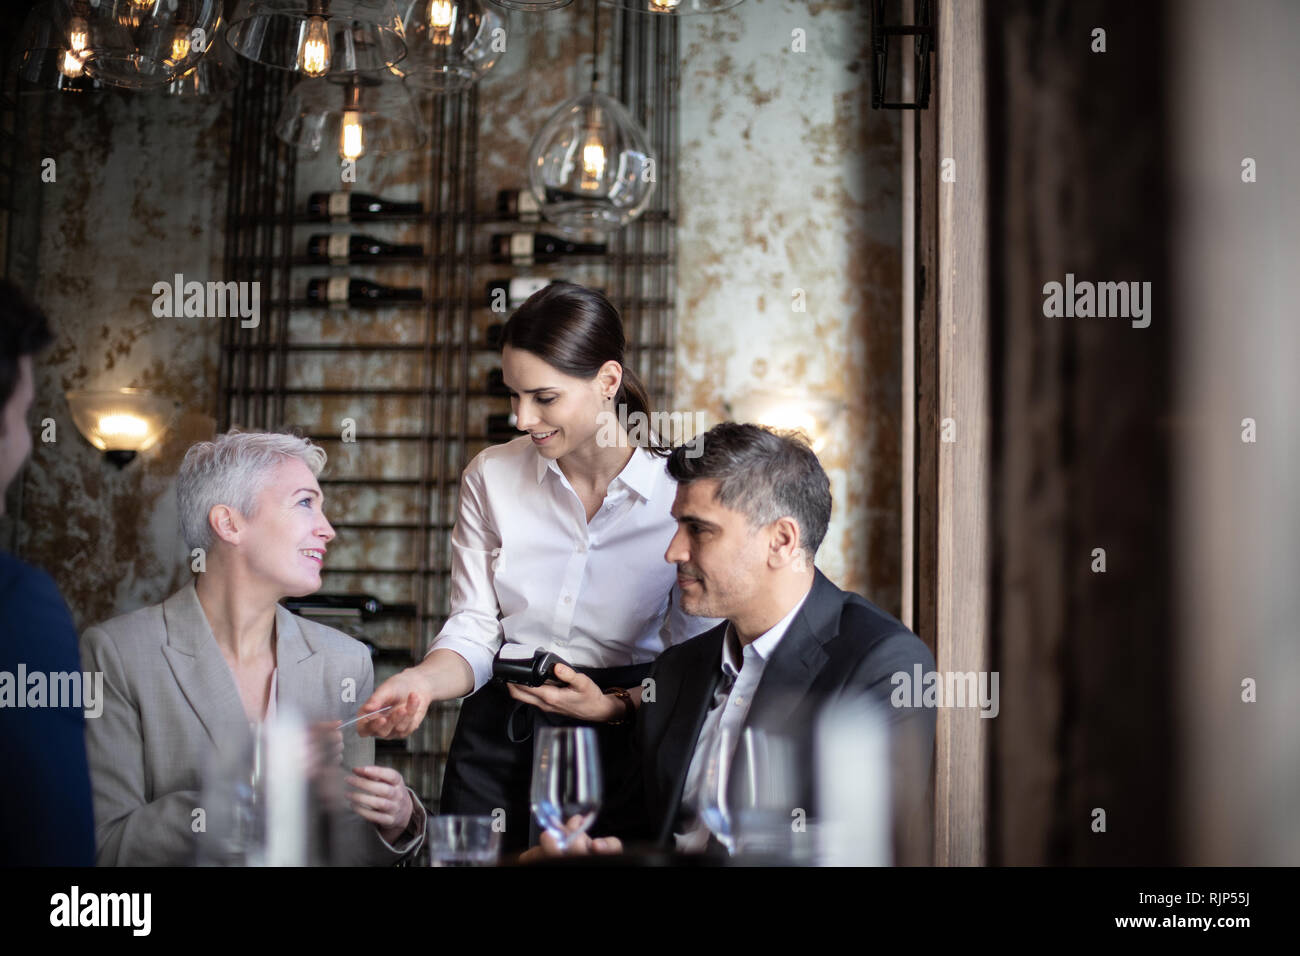 Waitress taking payment in a restaurant Stock Photo